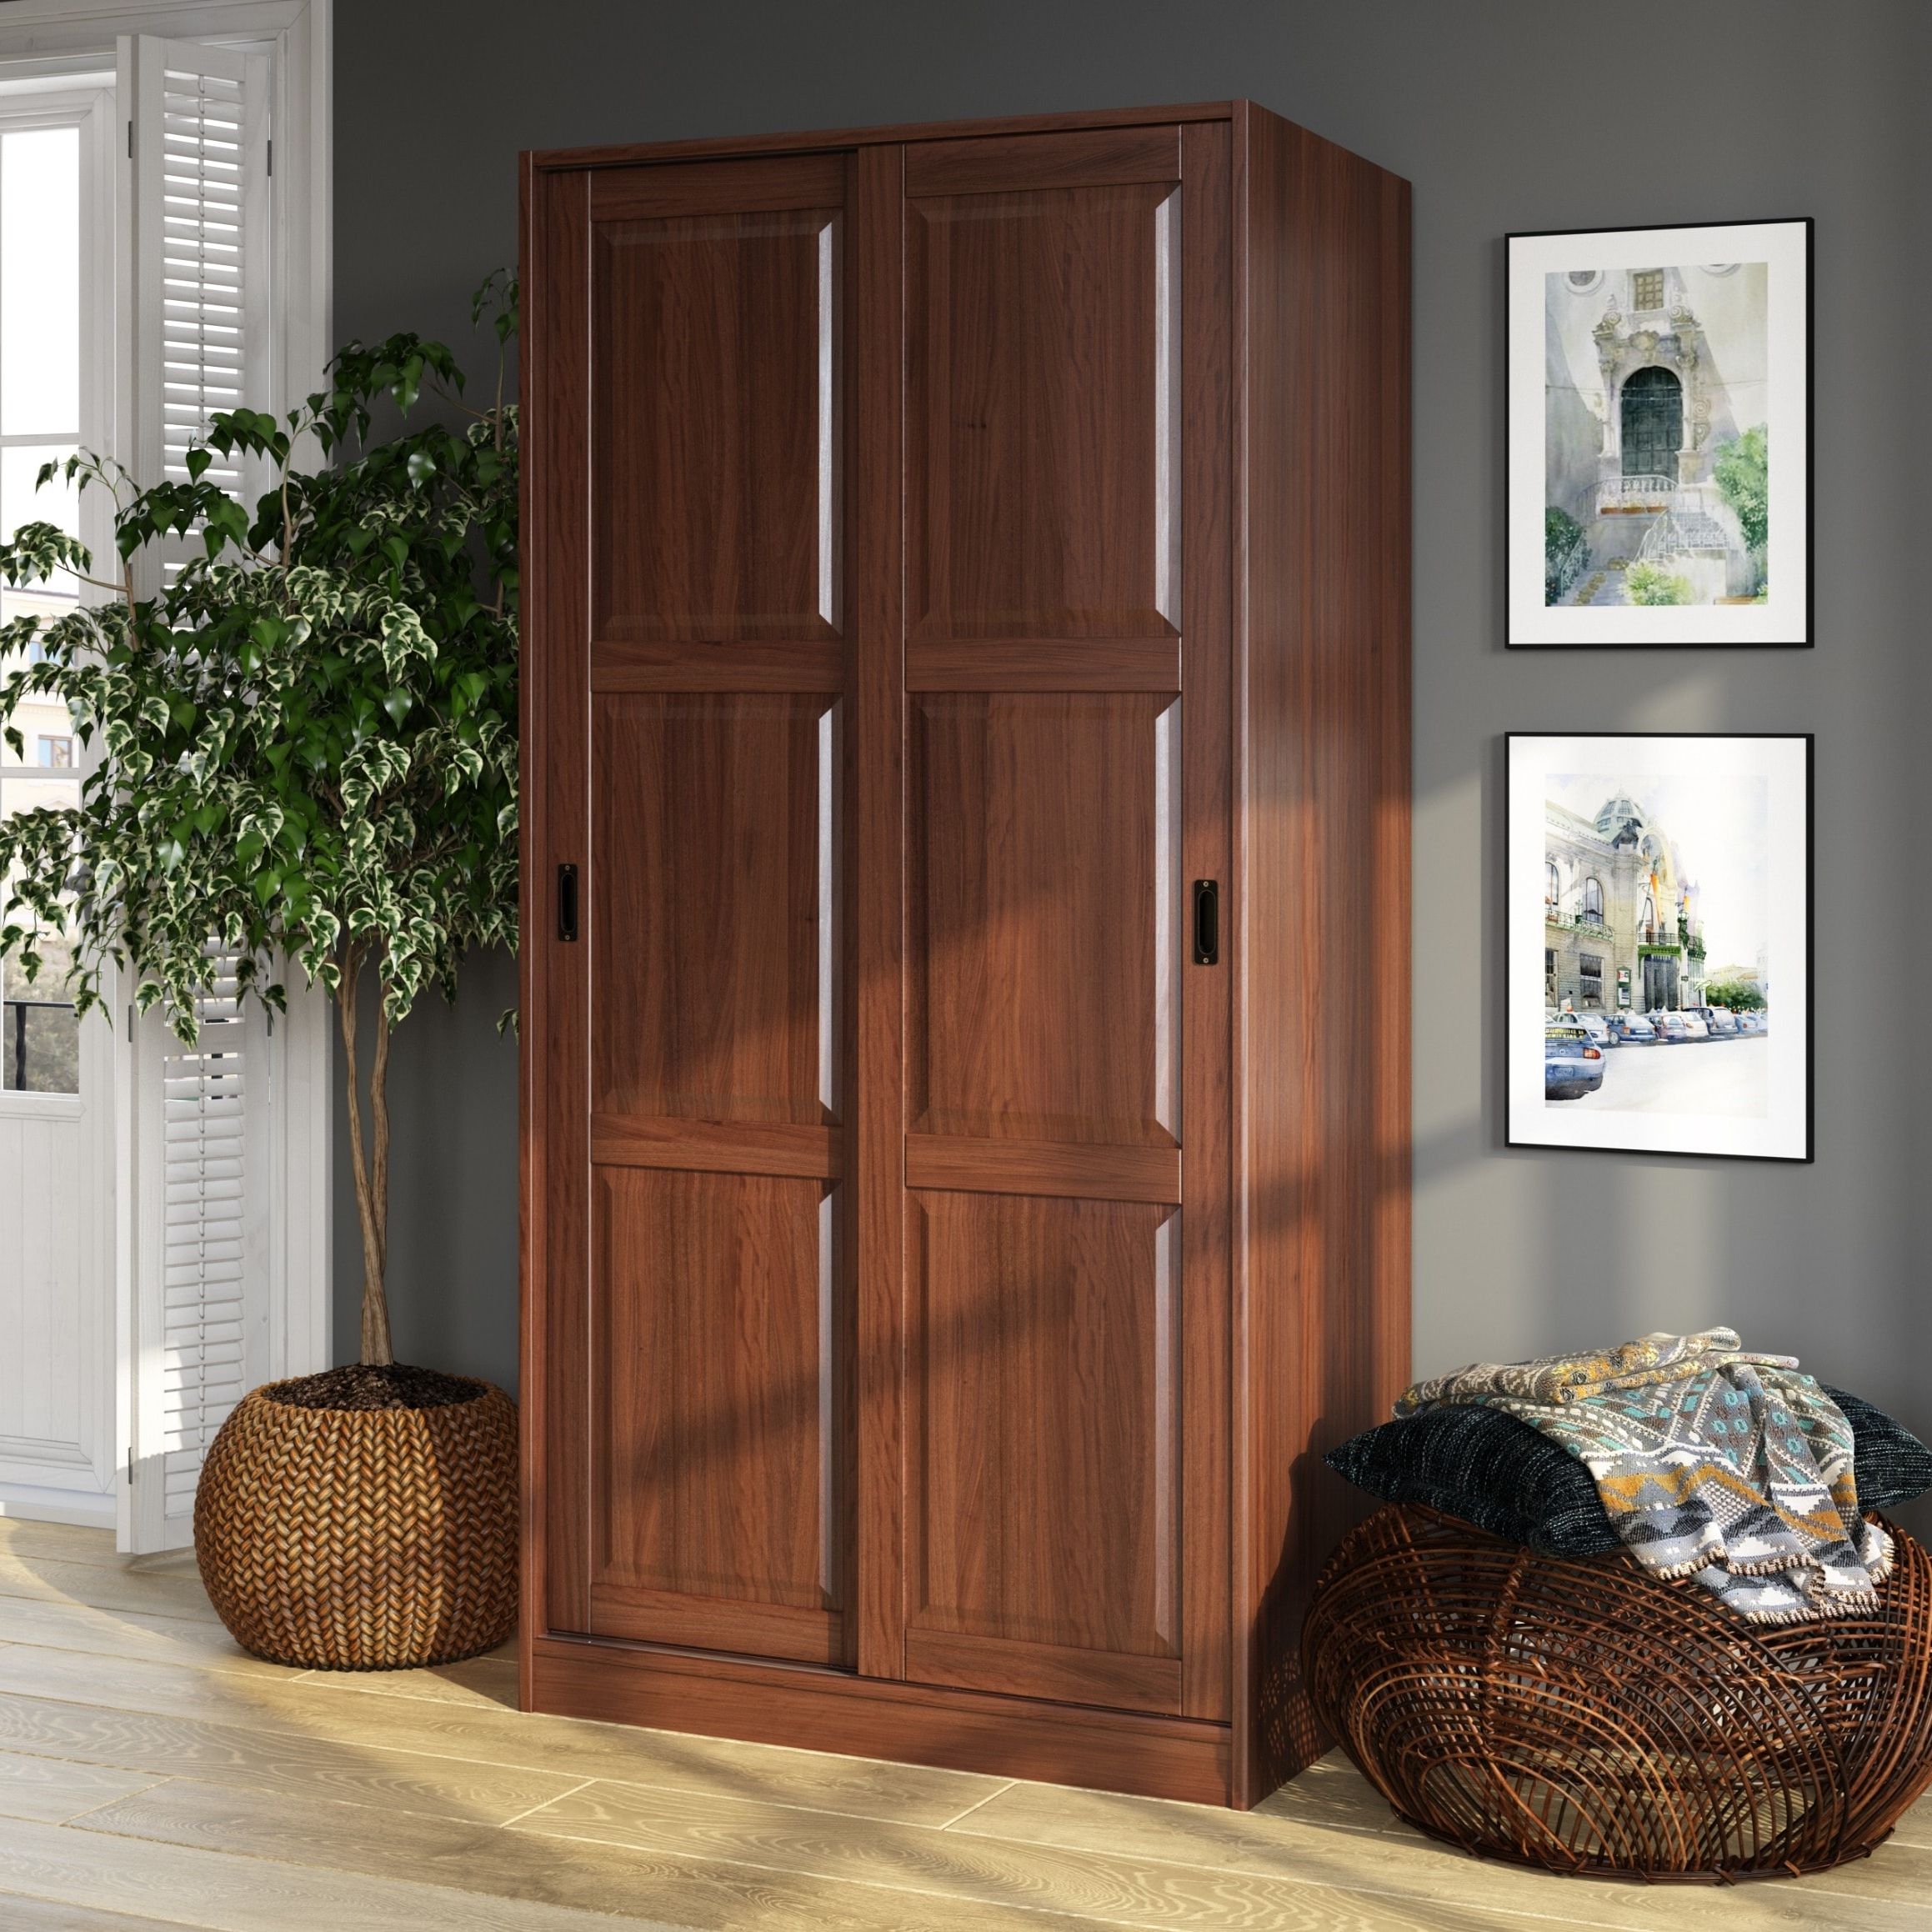 Palace Imports 100% Solid Wood 2 Sliding Door Wardrobe Armoire With  Mirrored, Closed Louvered Or Raised Panel Doors – Bed Bath & Beyond –  20000830 With 2 Sliding Door Wardrobes (Gallery 1 of 20)